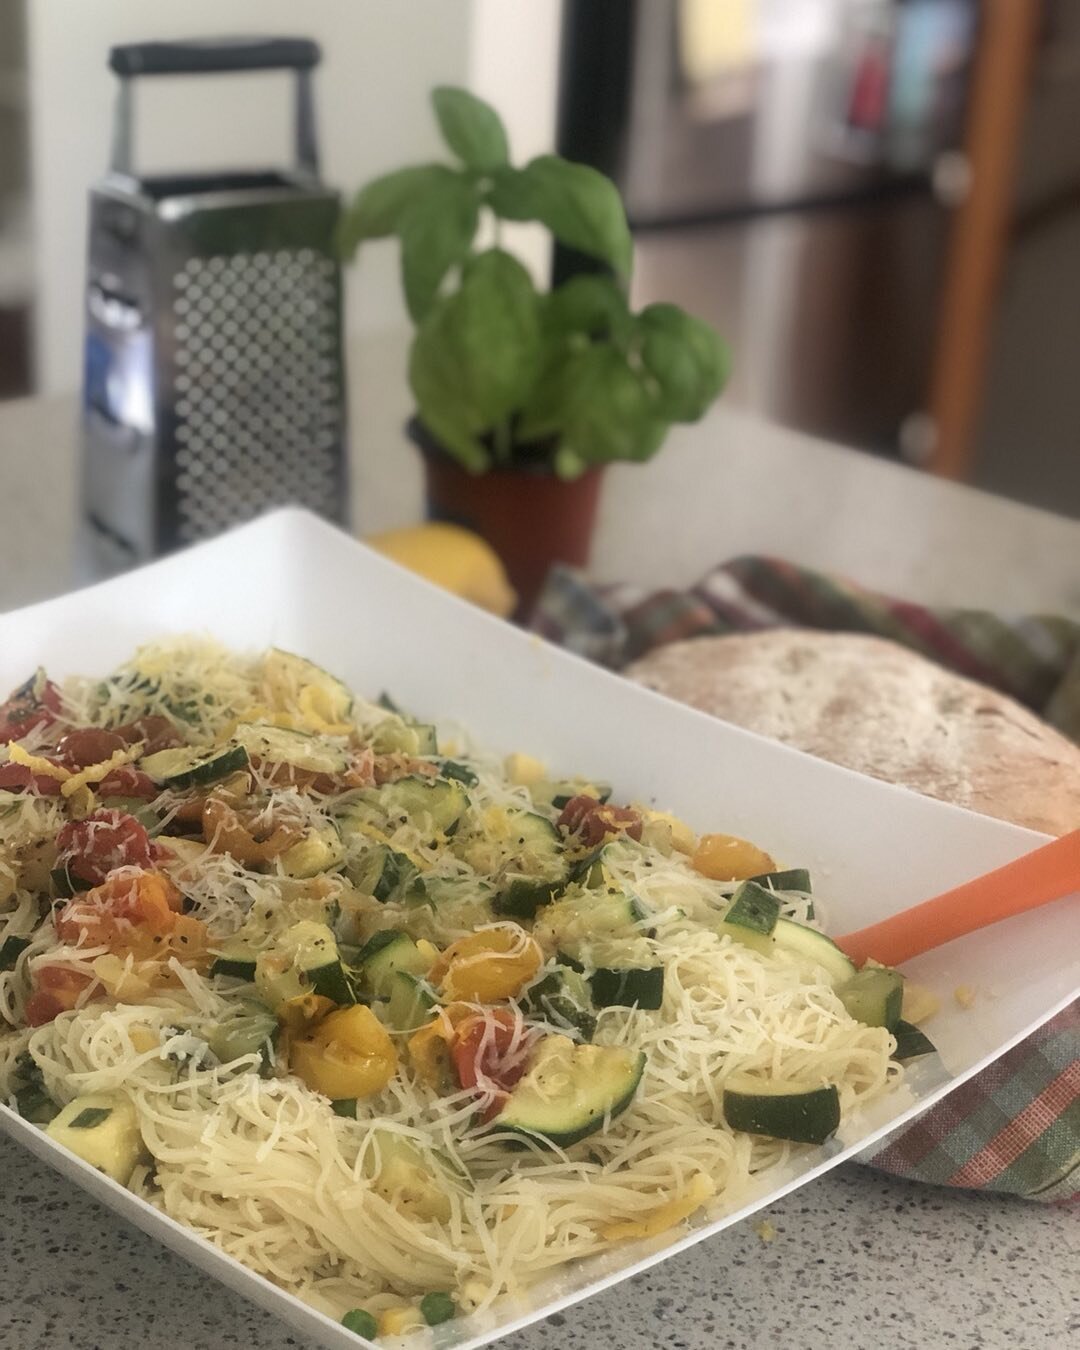 My Angel hair pasta at room temp with lots of roasted veggies and a lemon basil parmesan dressing is perfect for these hot days and it&rsquo;s hard to resist the homemade bread and parsley butter!  #manchestervt #vermont 
#vermontvacation #vermontvac